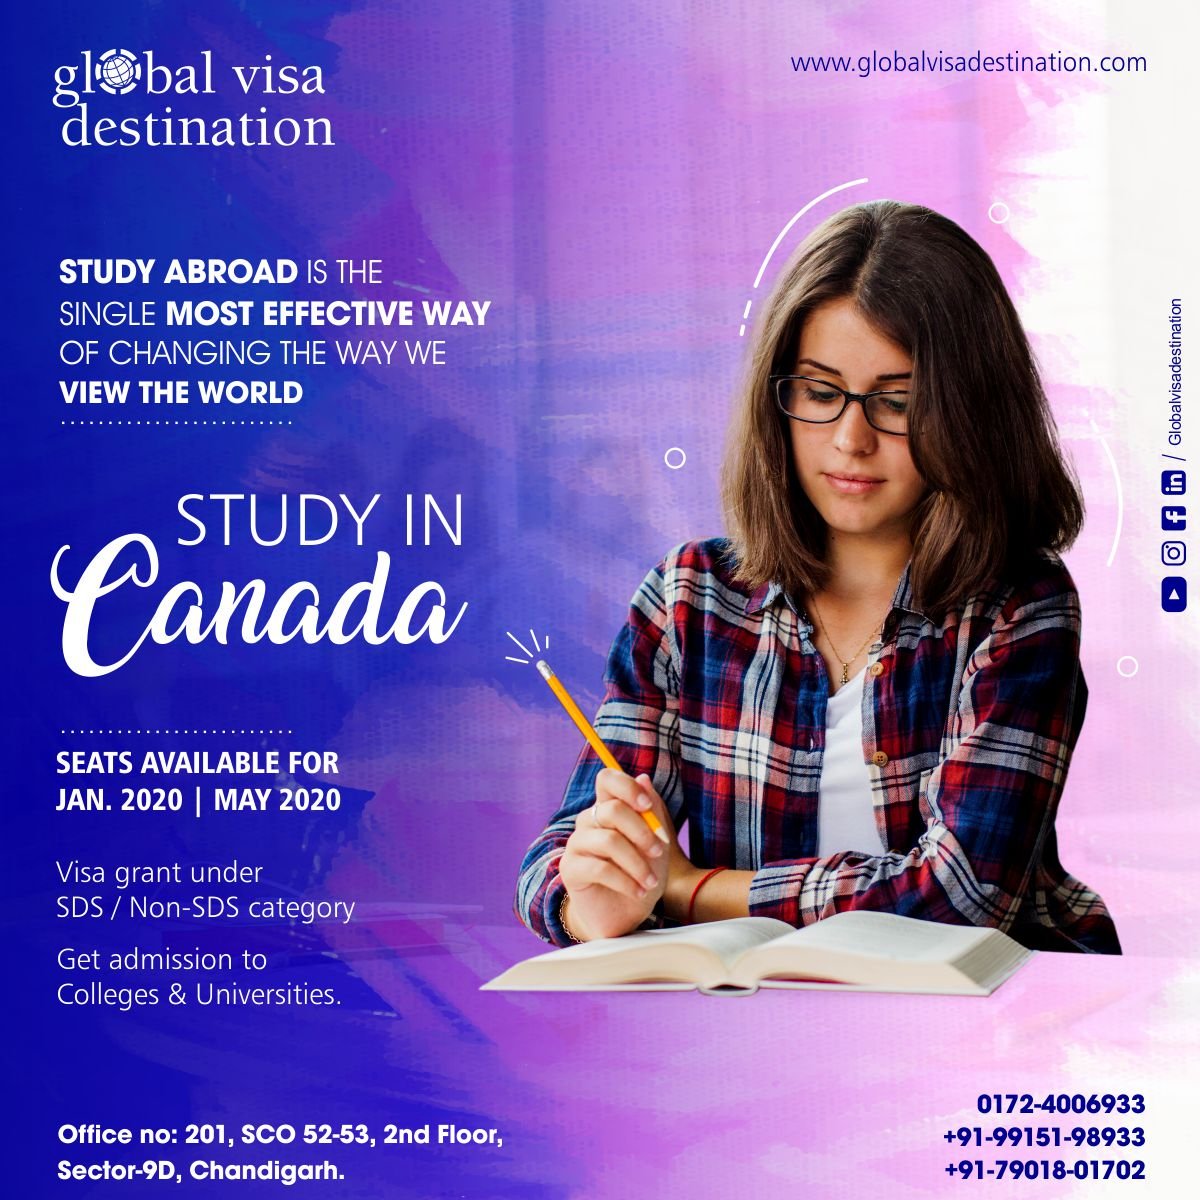 Study and Settle in Canada. Choose from Best & Top Universities of Canada. 
Seats available for Jan. 2020 & May 2020 Intake.
Call 9915198933 for more information.

#gvd #studyabroad #studyvisa #canada #studyincanda #studentlife #punjab #chandigarh